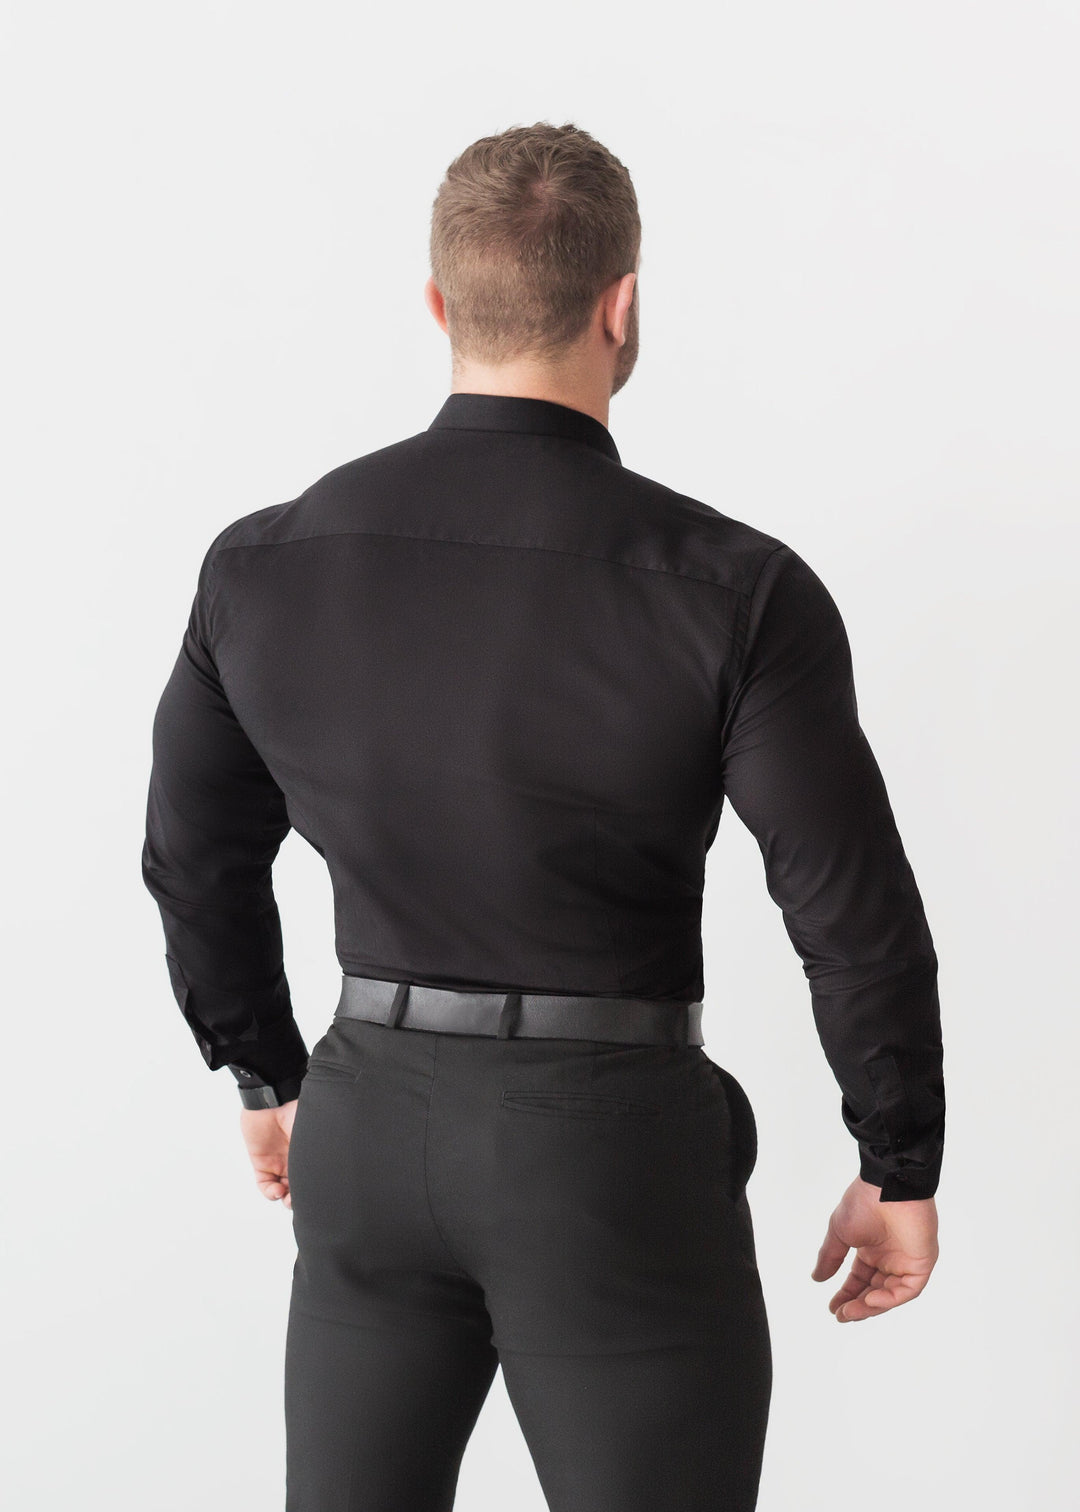 Black Tapered Fit Shirt Back. A Proportionally Fitted and Comfortable Muscle Fit Shirt. Ideal for bodybuilders.